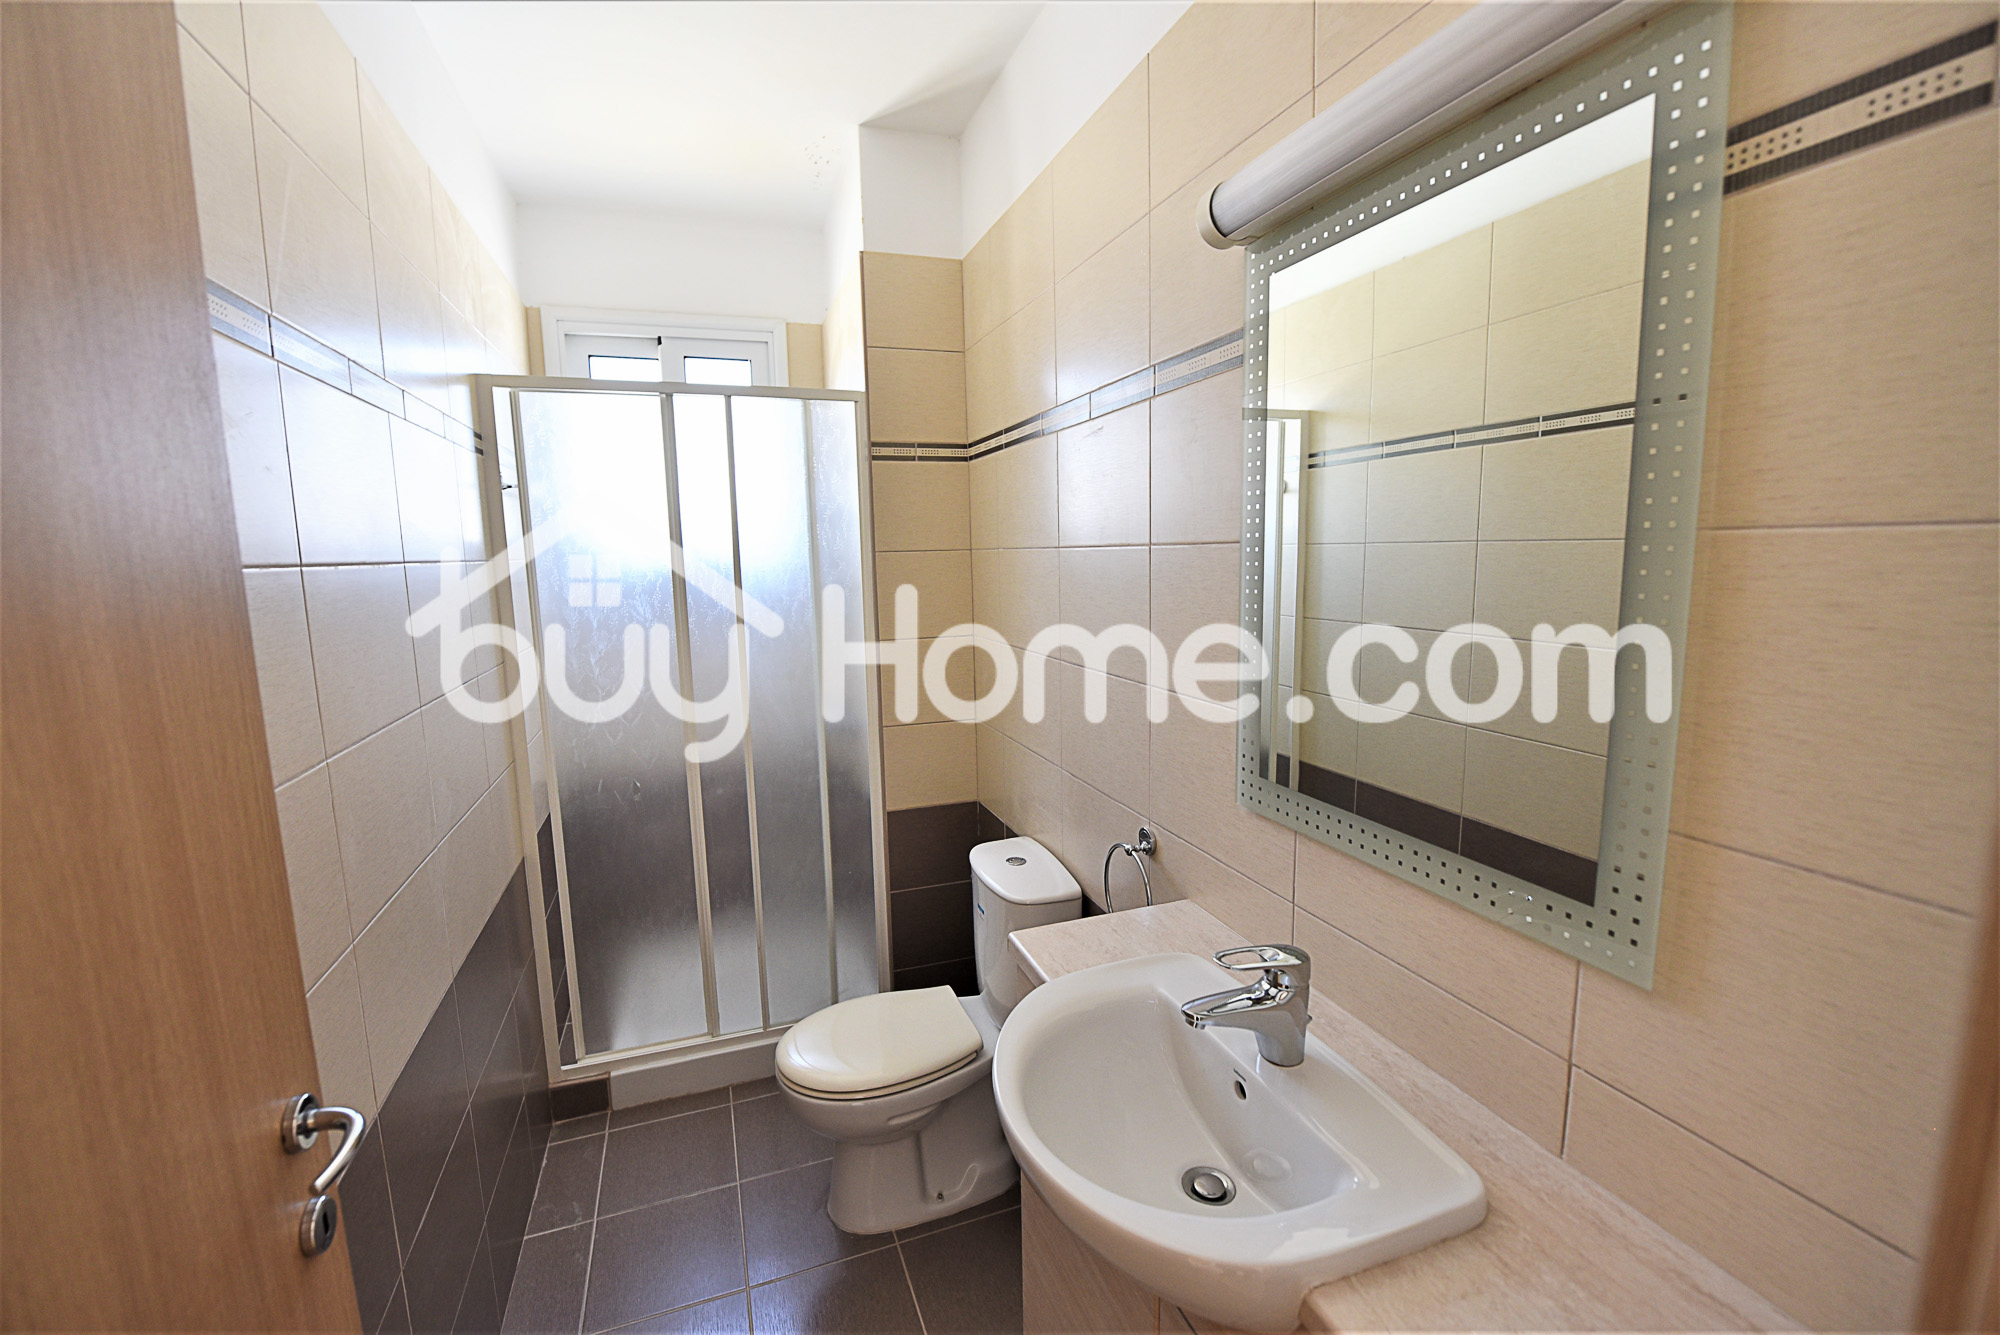 3 x 2 Bedroom Apartments for Rent | BuyHome